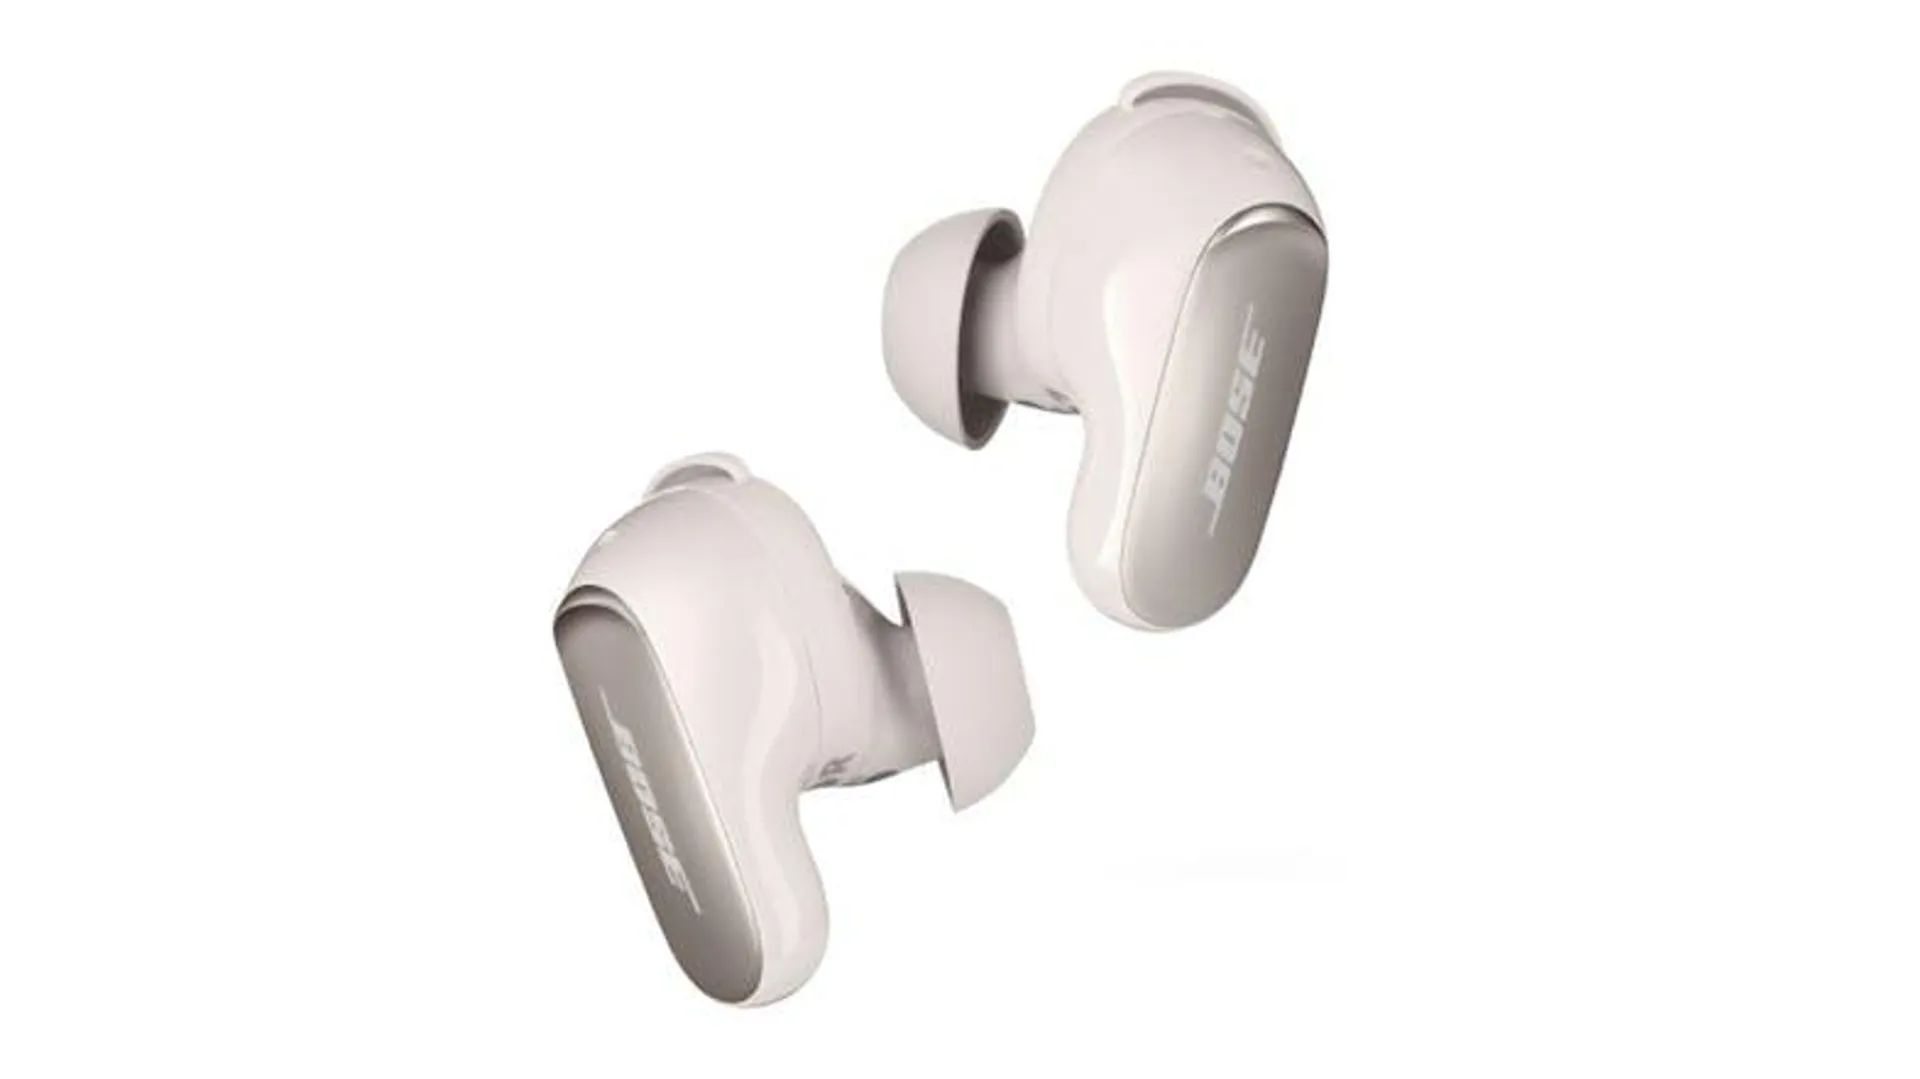 Bose QuietComfort Ultra Active Noise Cancelling True Wireless In-Ear Headphones - White